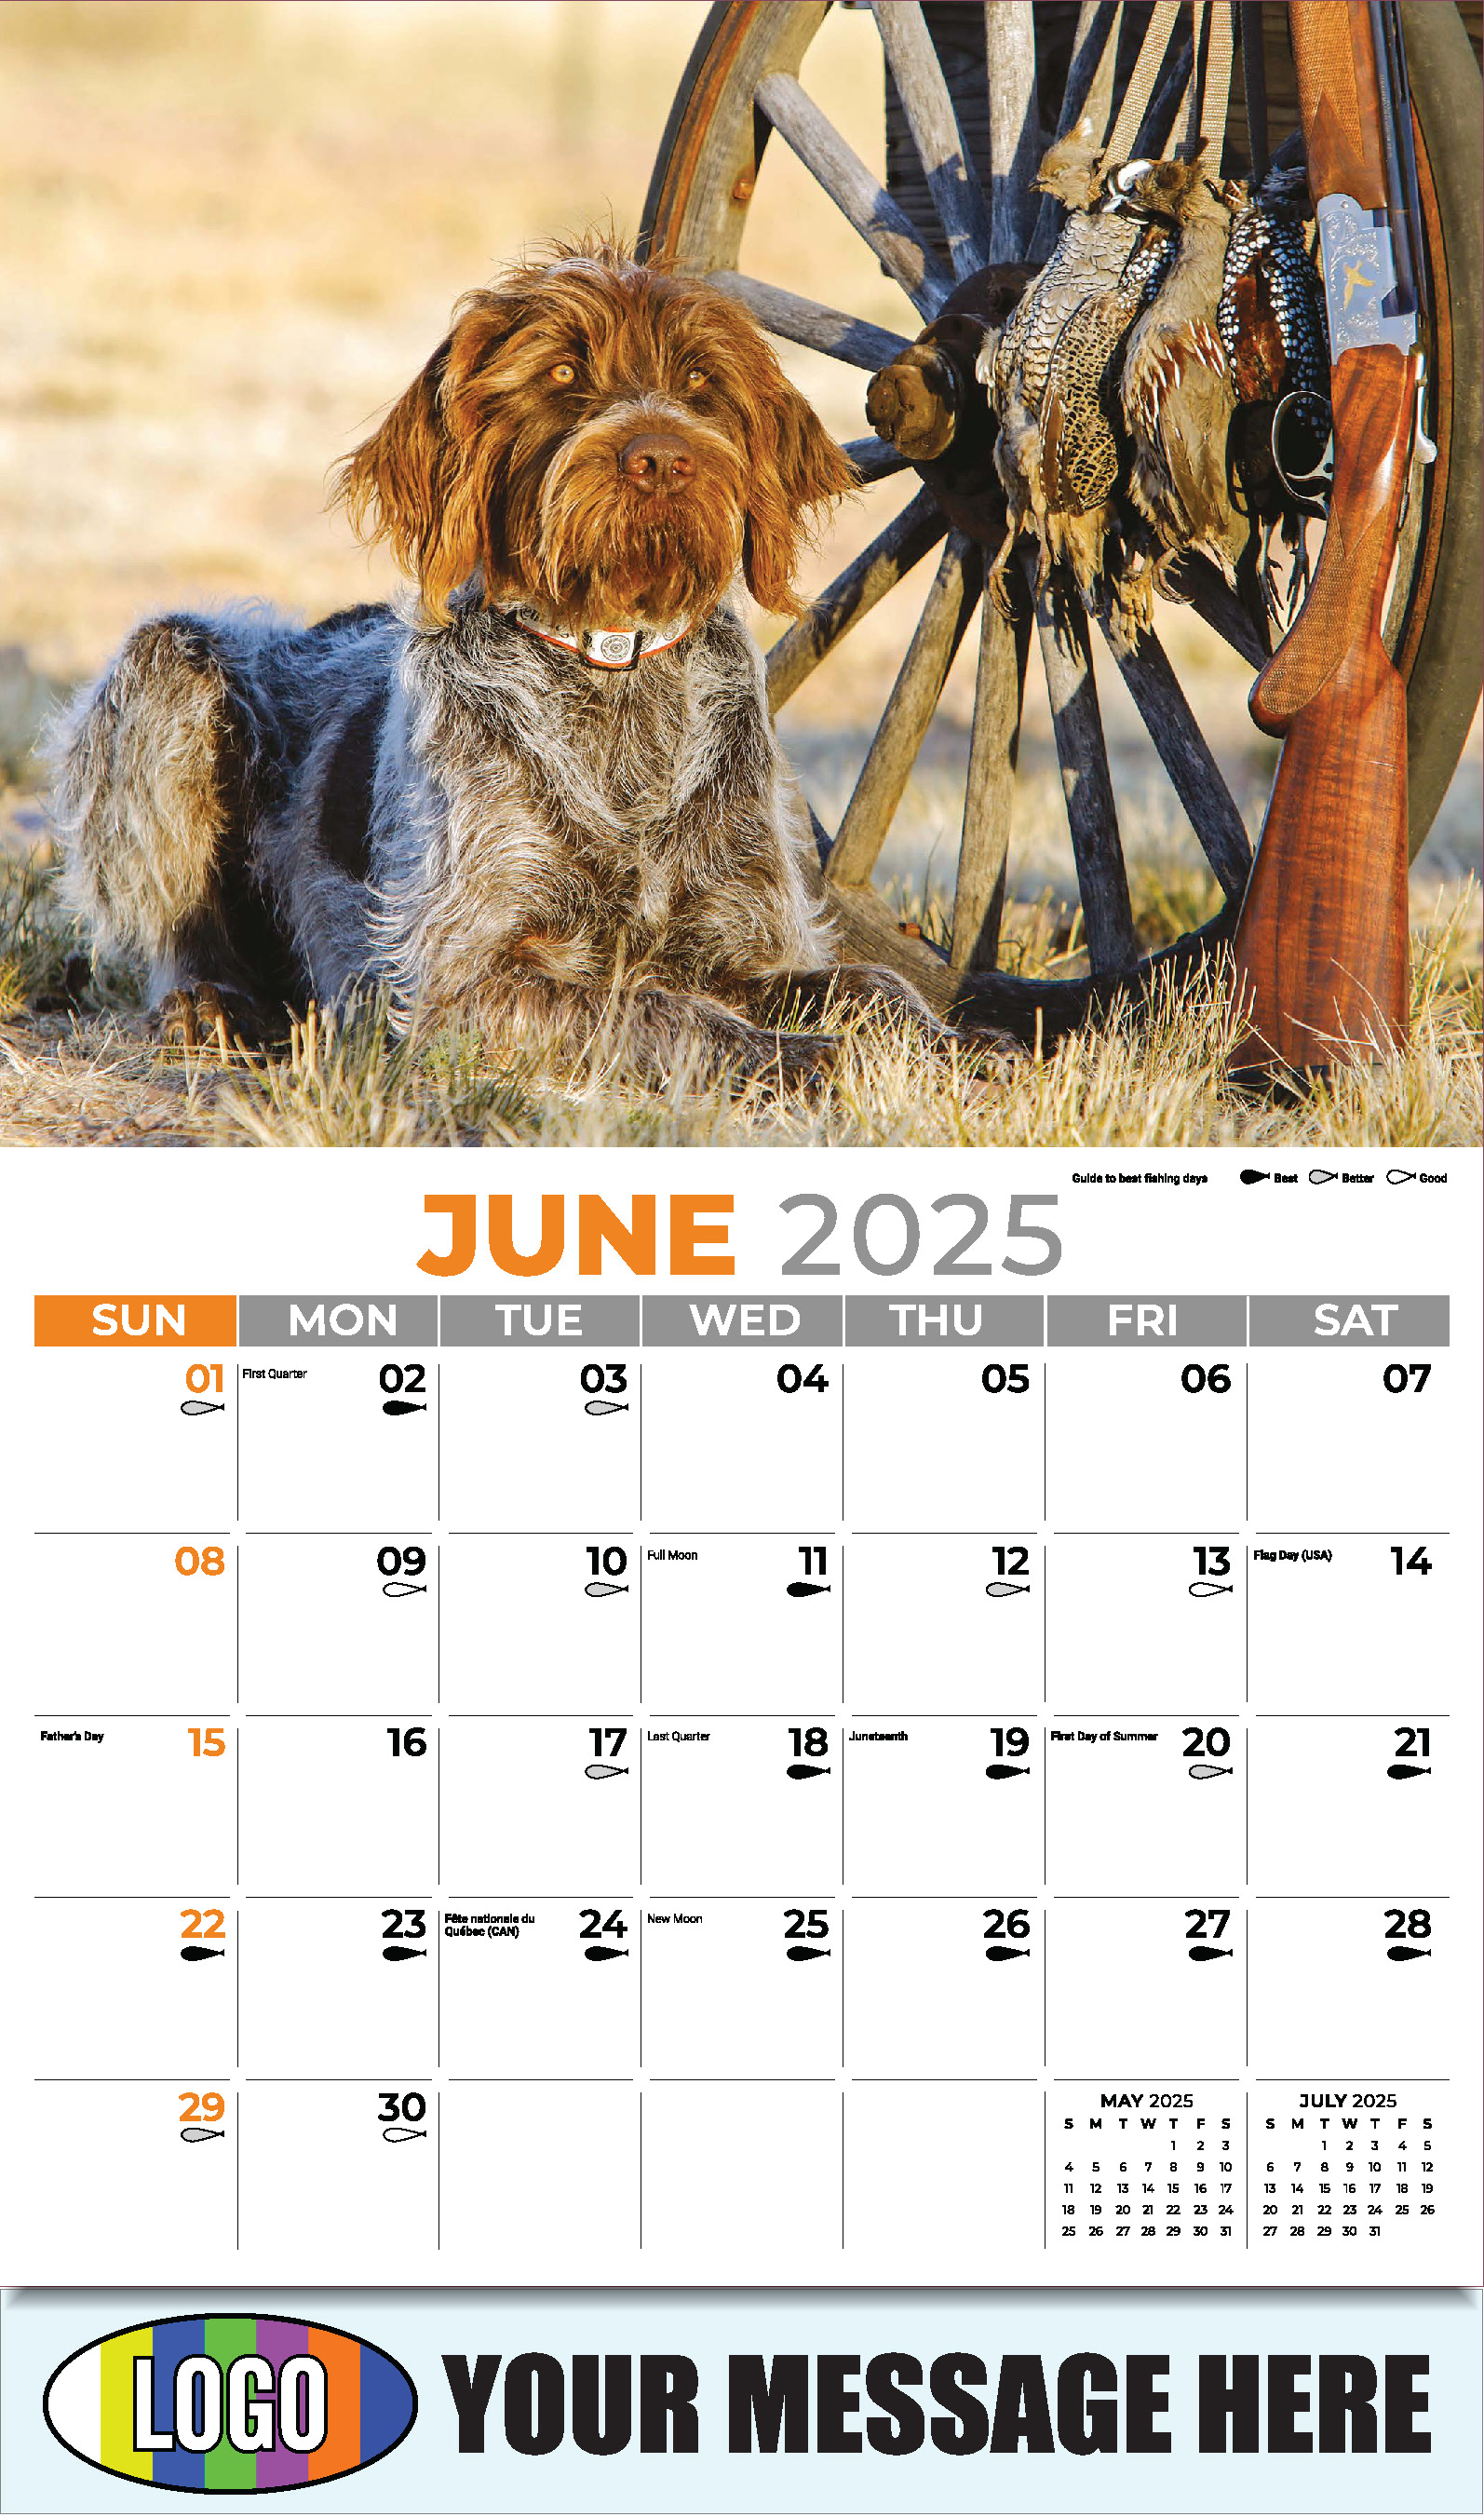 Fishing and Hunting 2025 Business Promotion Calendar - June